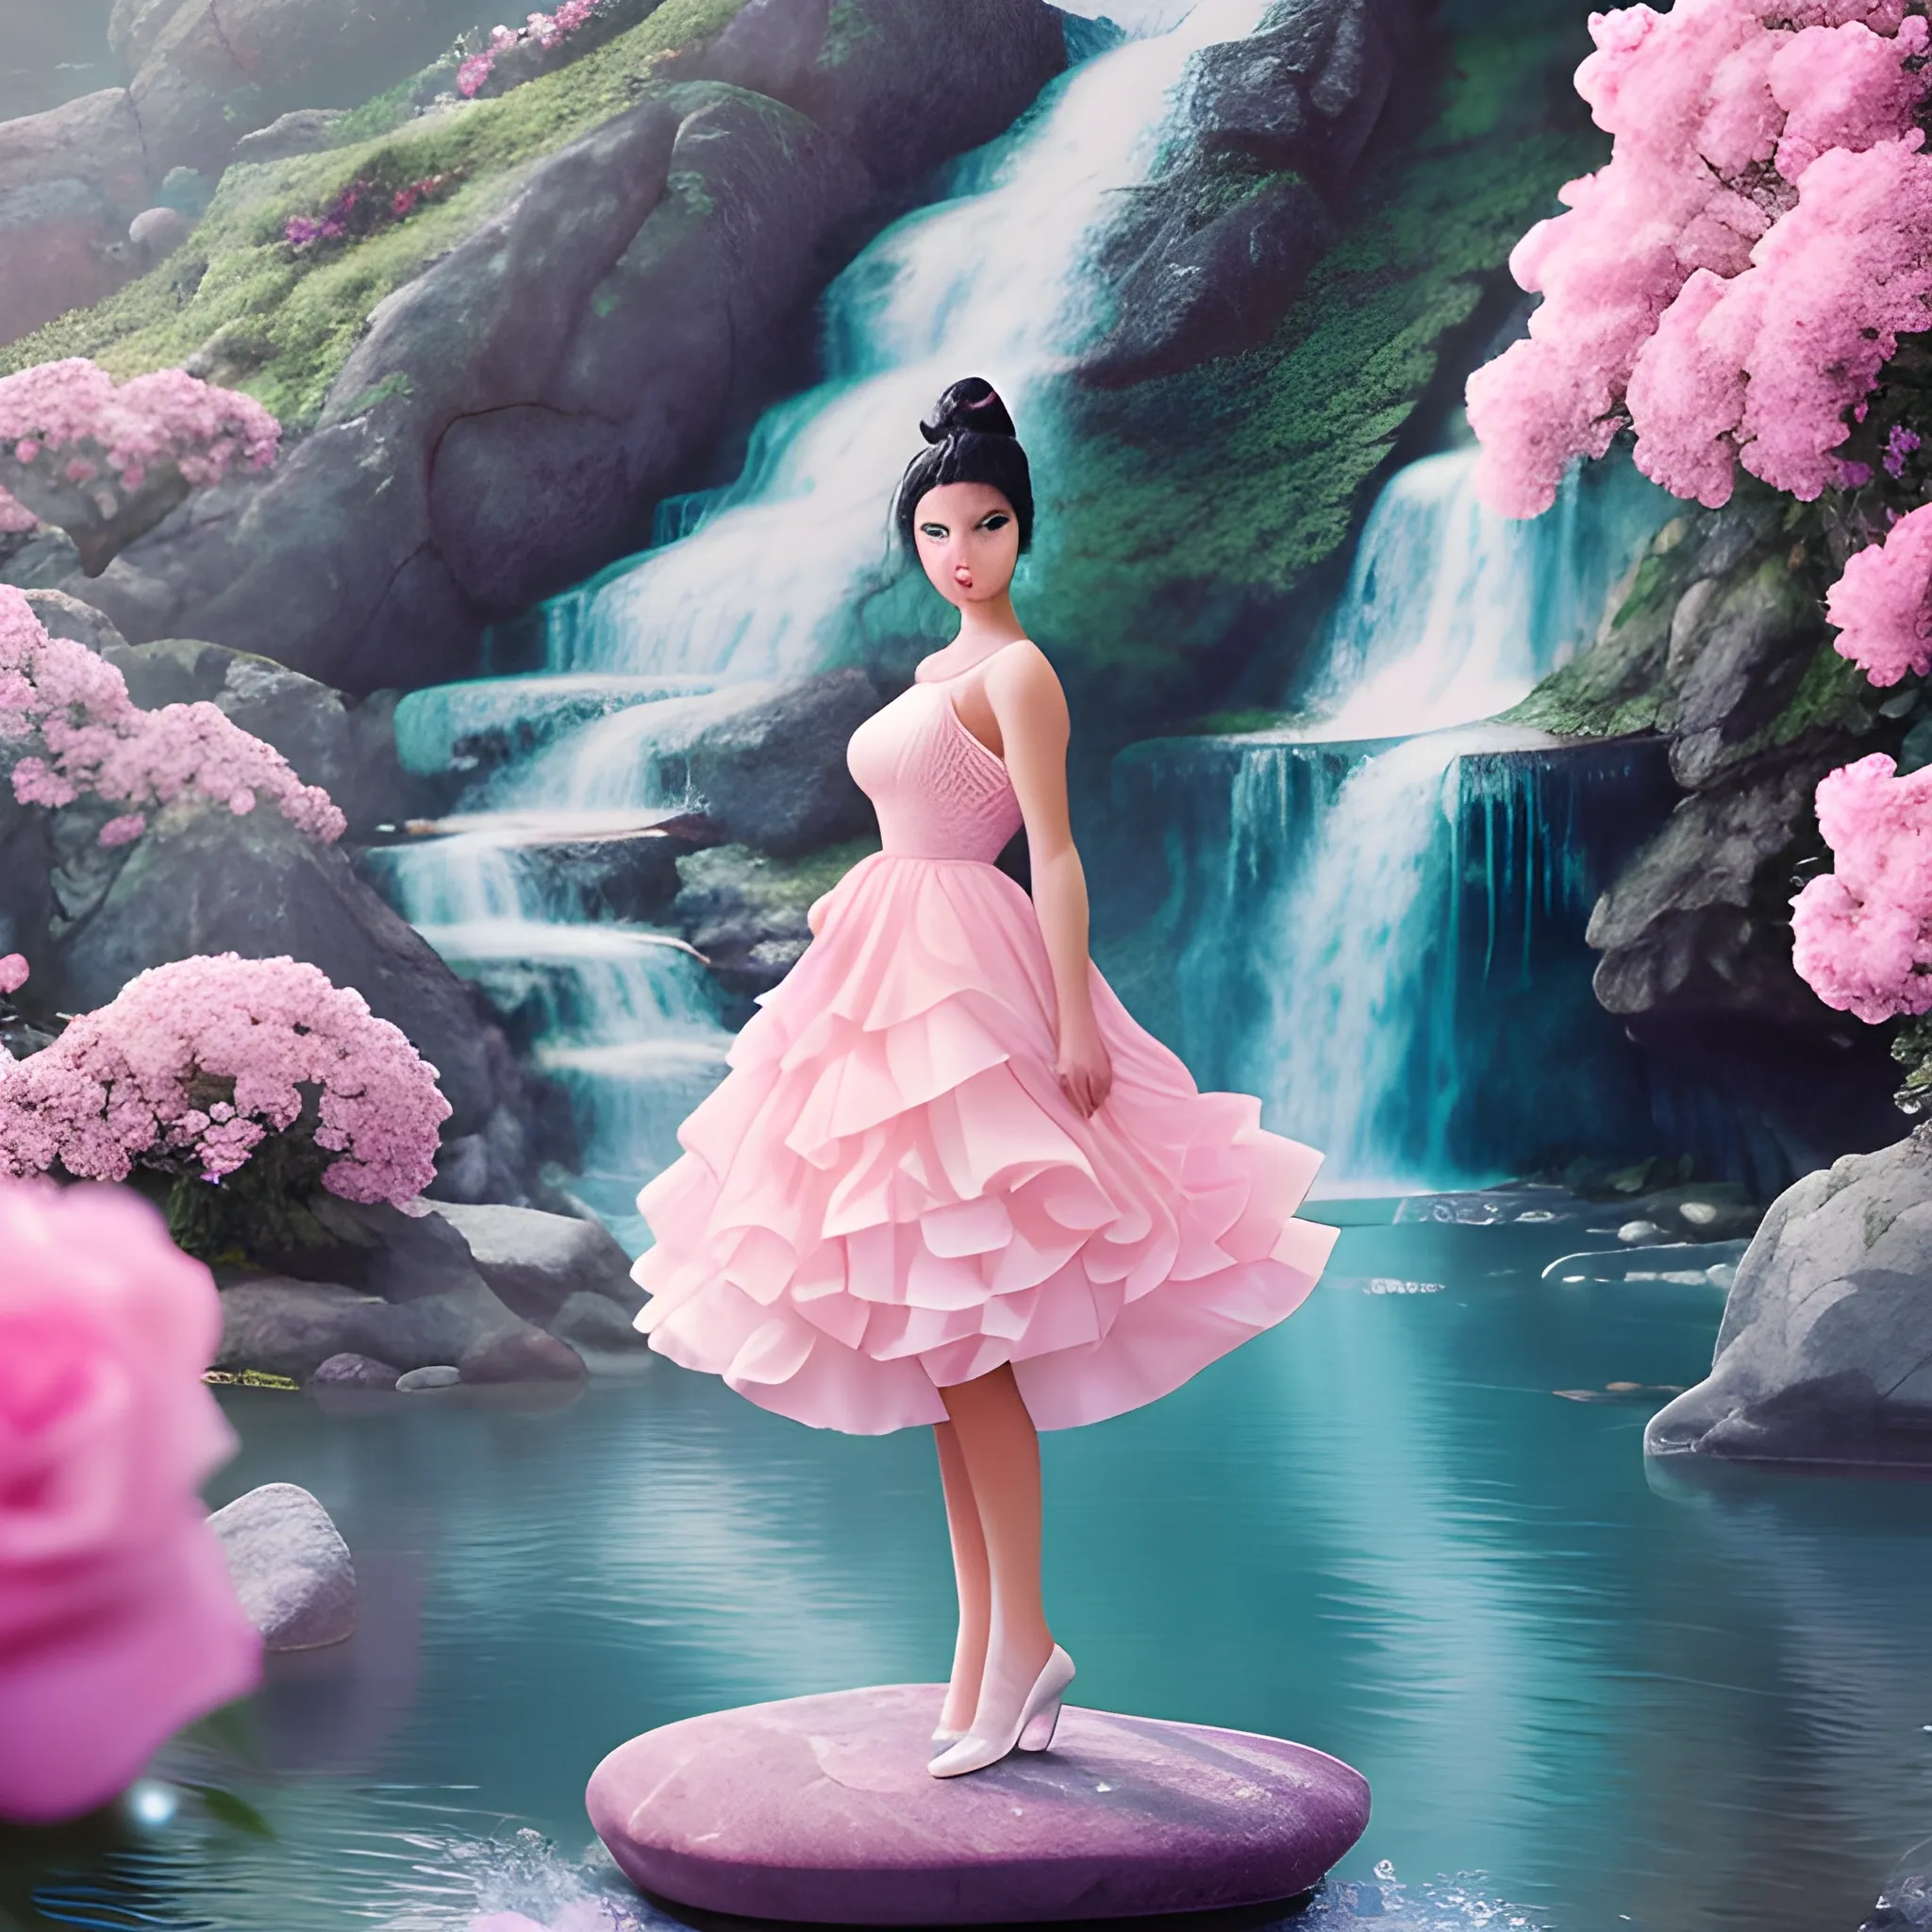 Very beautiful woman, black hair, bun hair, sexy dress, standing on big stone, pink roses, light blue and pink, romanticism, high detail, 8K resolution, ultra high definition picture, waterfall background